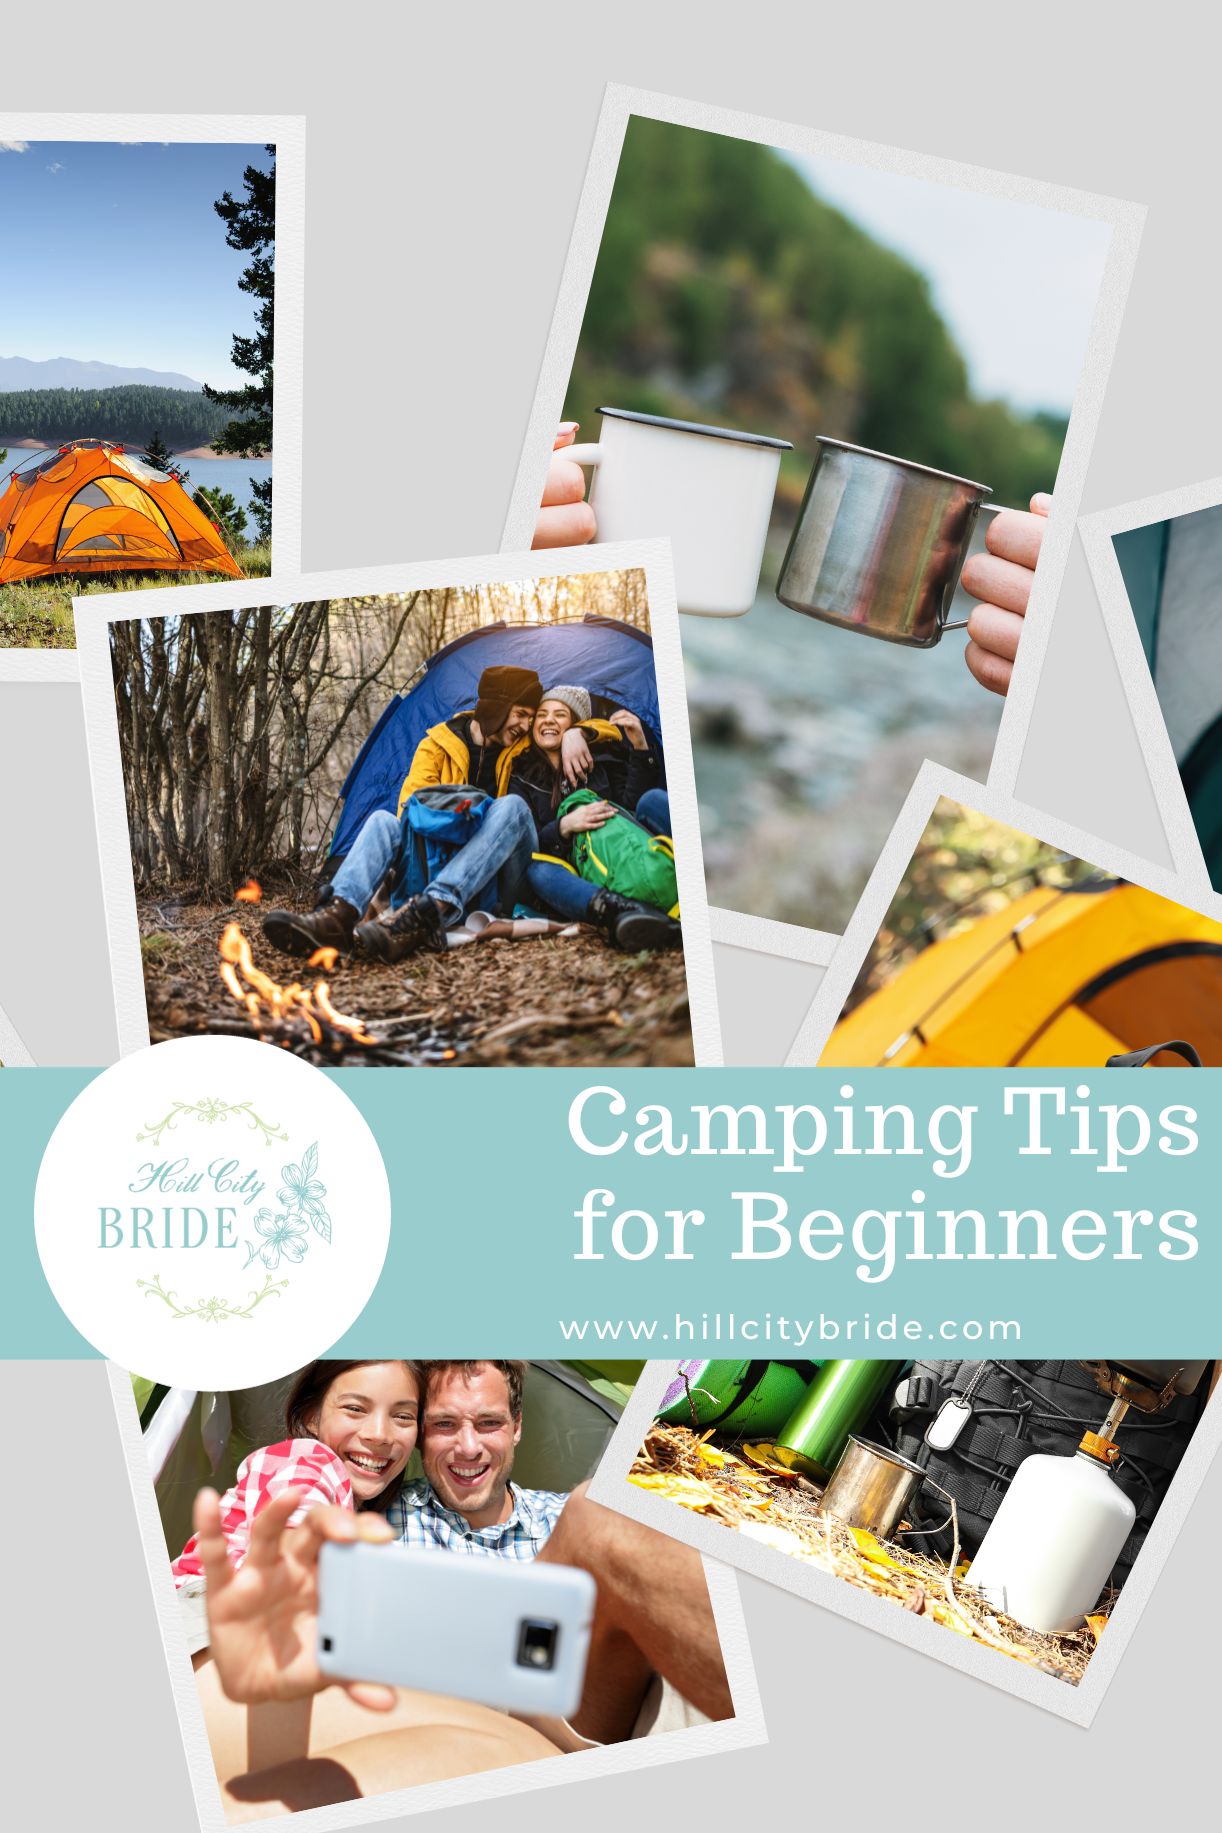 How to Go Camping for the First Time